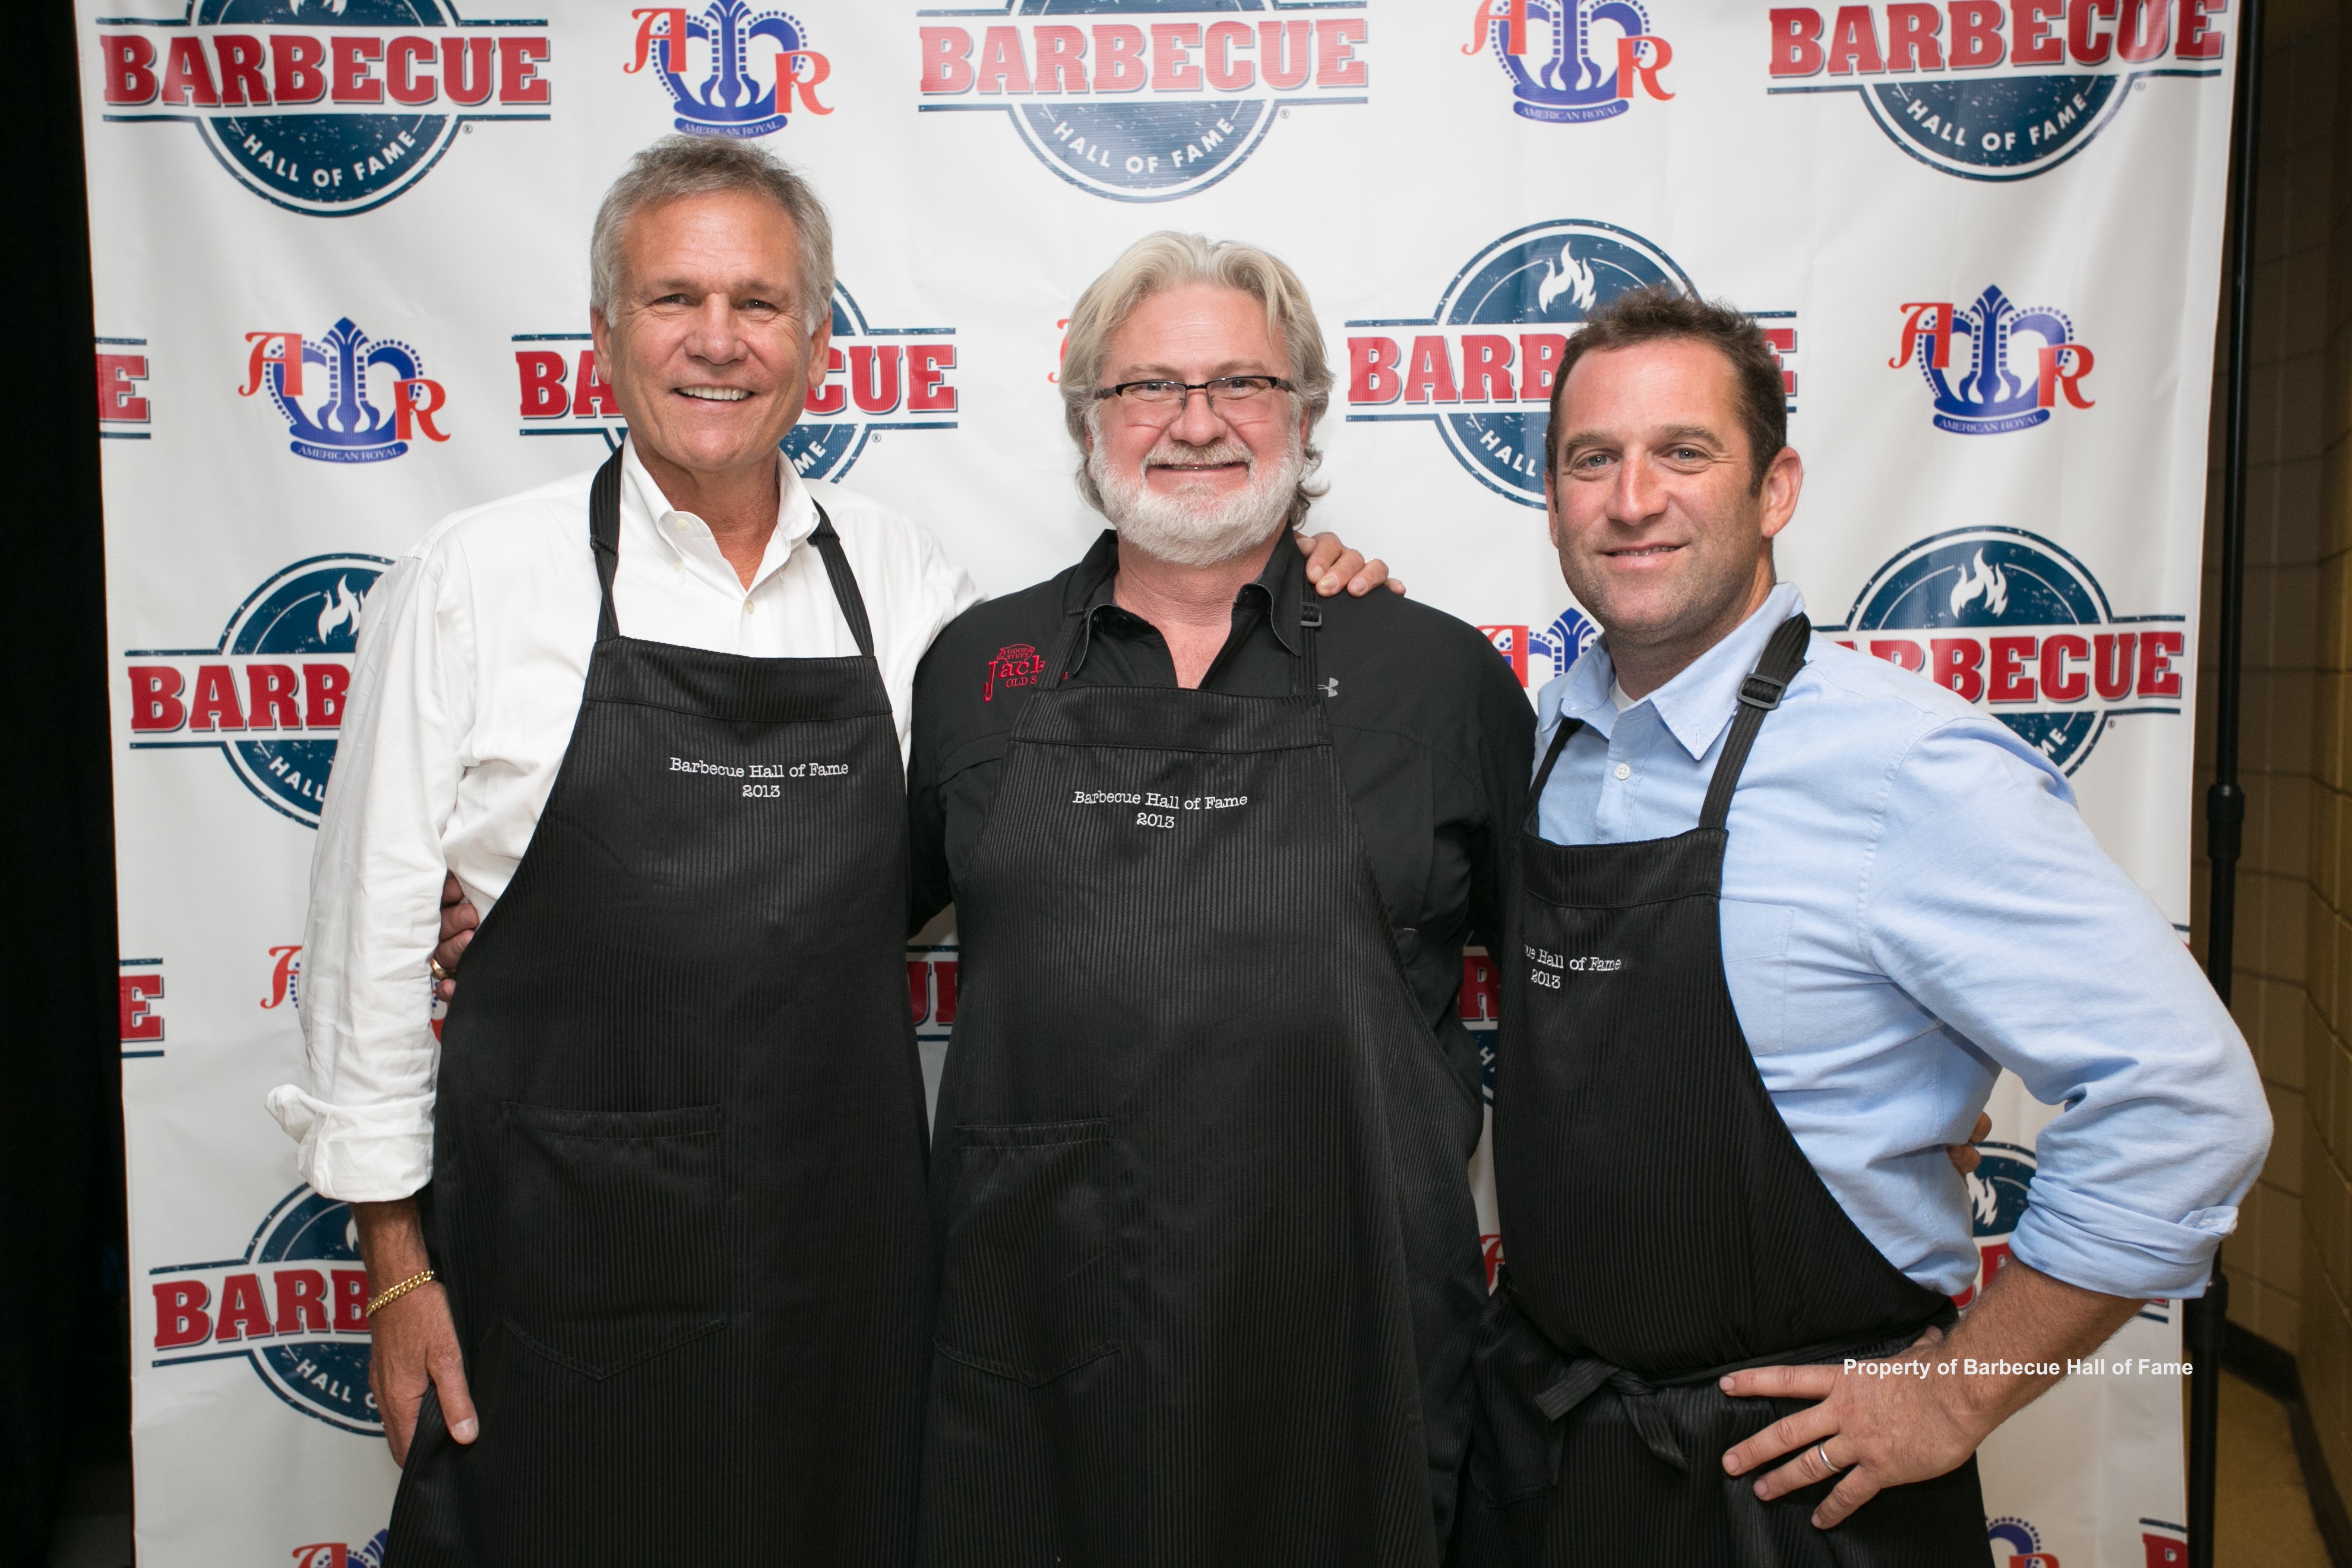 Barbecue Hall of Fame - 2013 Inductees - George Stephen, Sr., Myron Mixon, Adam Perry Lang